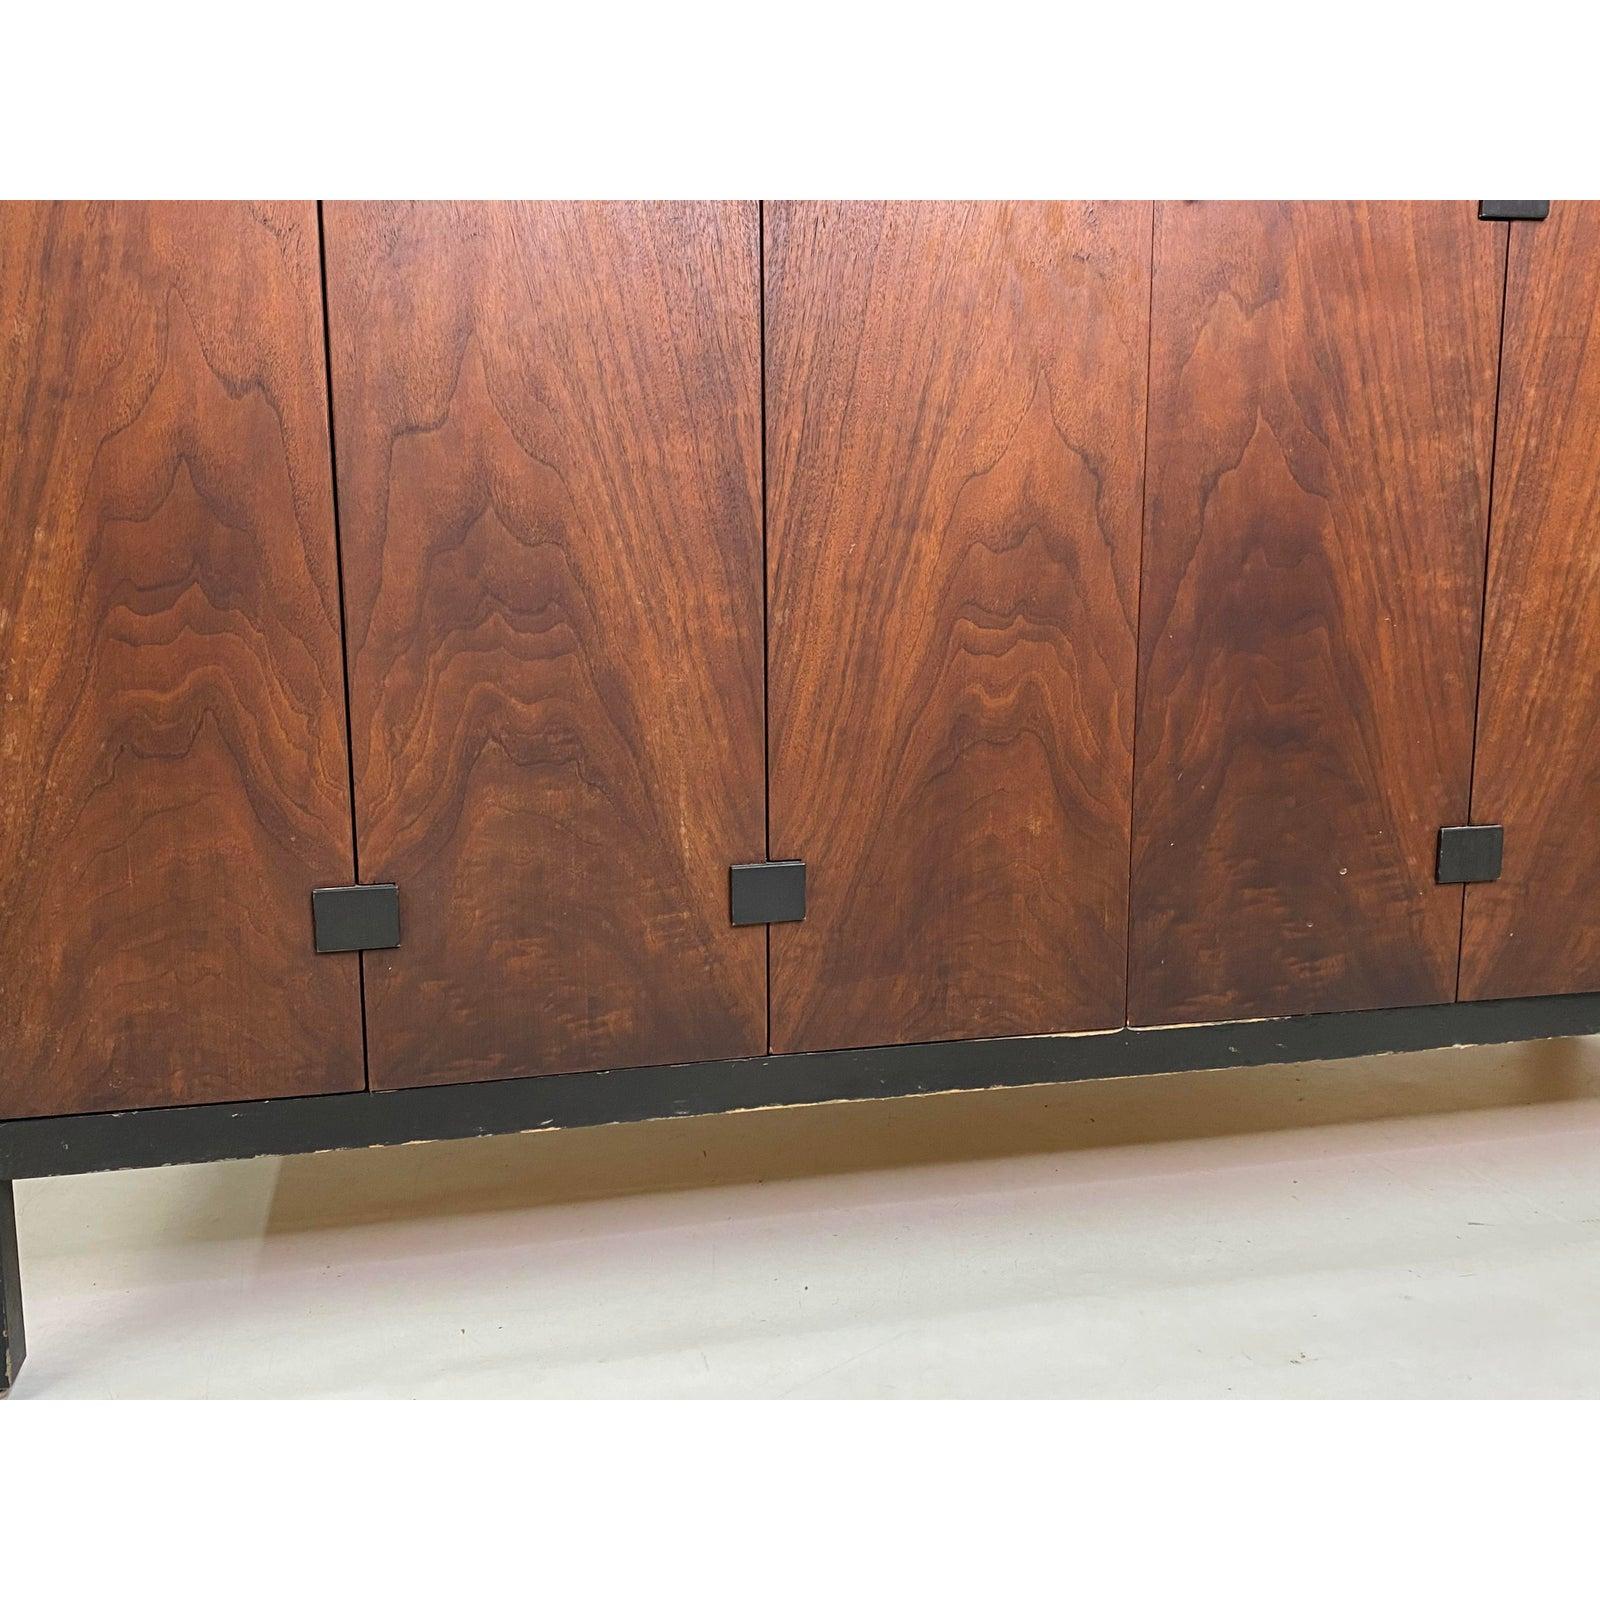 American Mid-Century Walnut Hutch / China Cabinet by Milo Baughman for Directional